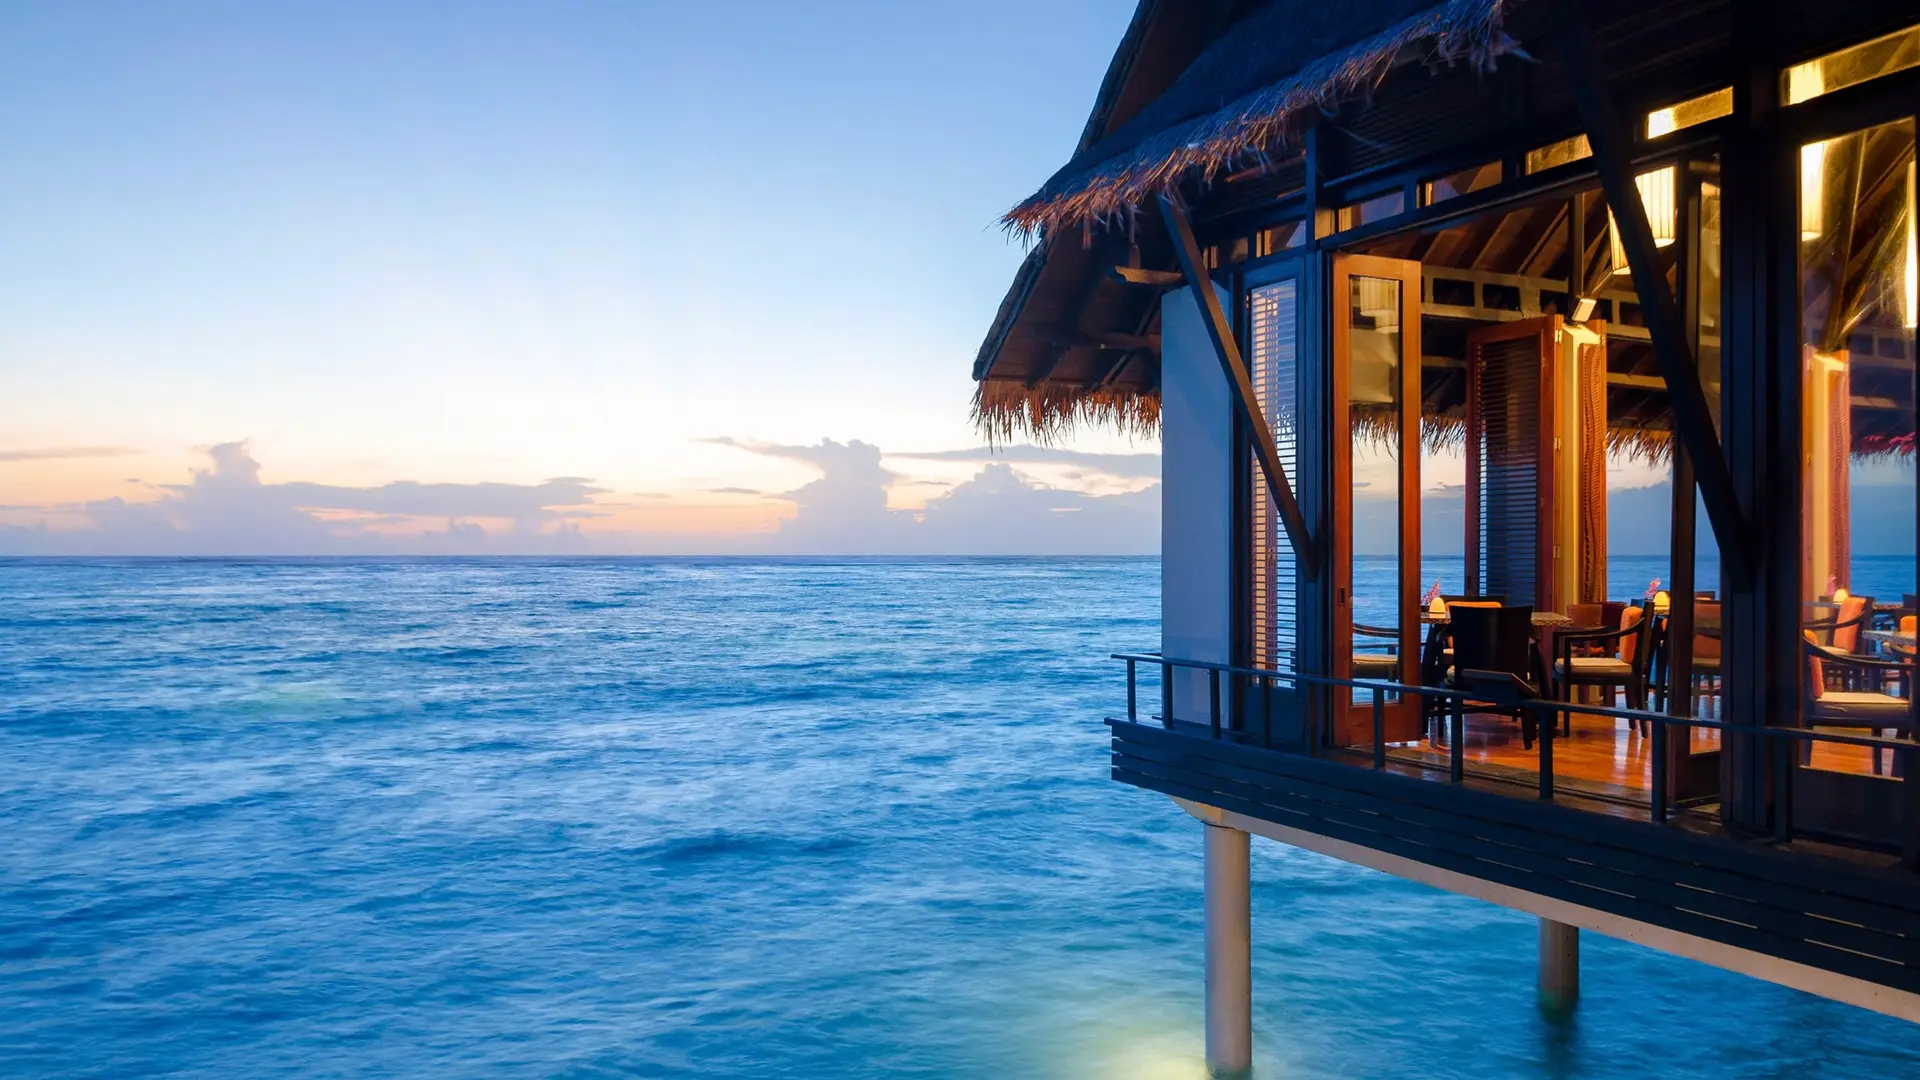 Hotel review Restaurants & Bars' - One&Only Reethi Rah - 0